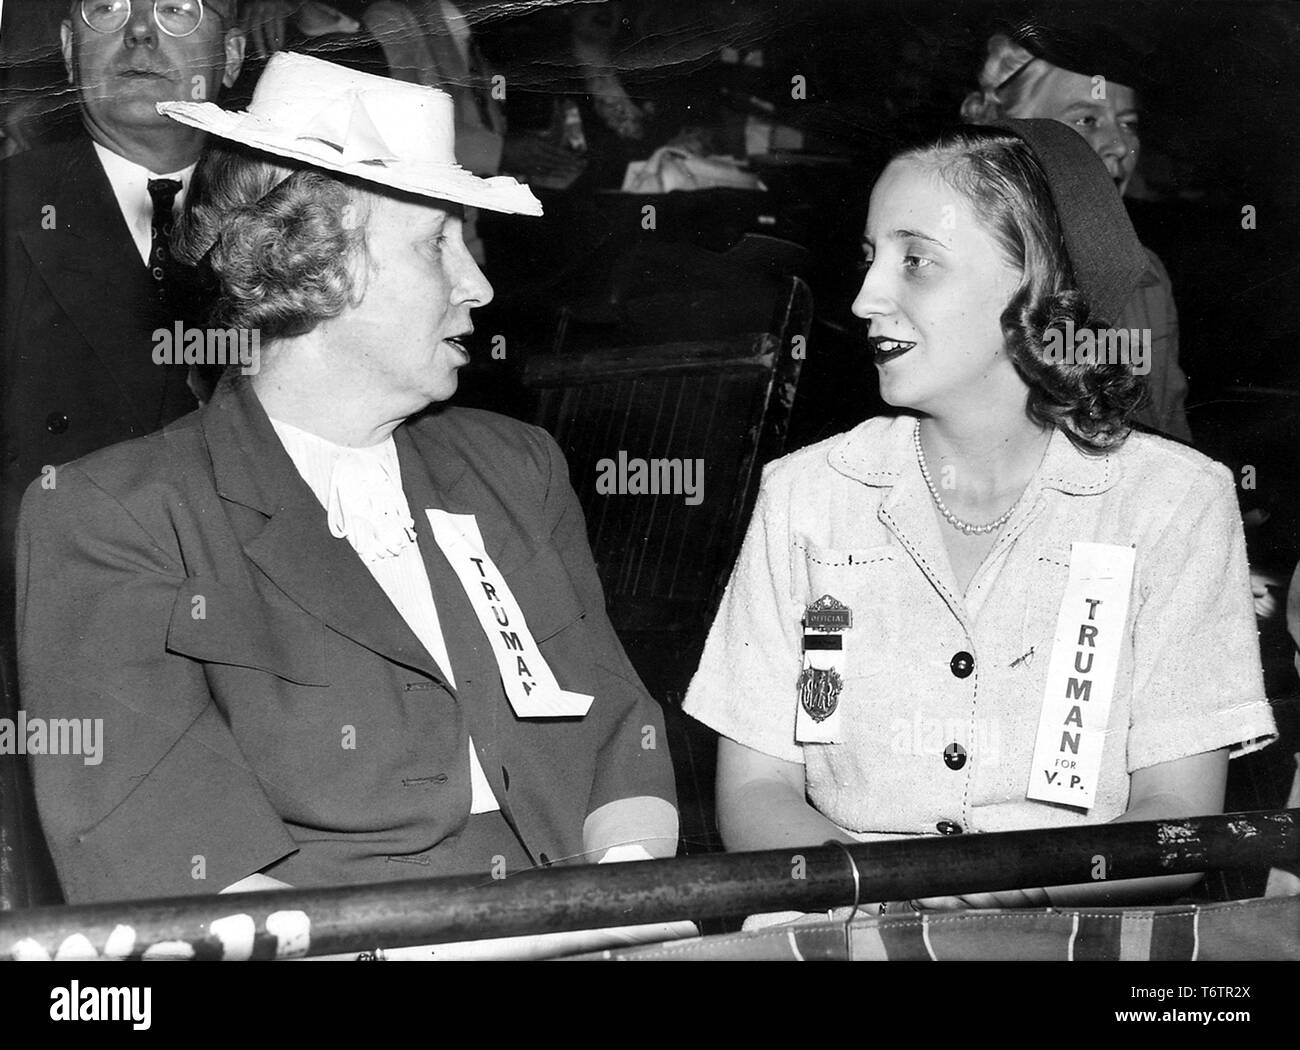 Candid of Bess Truman, first lady to President Harry S Truman, and Margaret Truman, daughter of President Harry S Truman and his first lady Bess Truman, at the Democratic Convention, Illinois, July, 1940. Image courtesy National Archives. Stock Photo